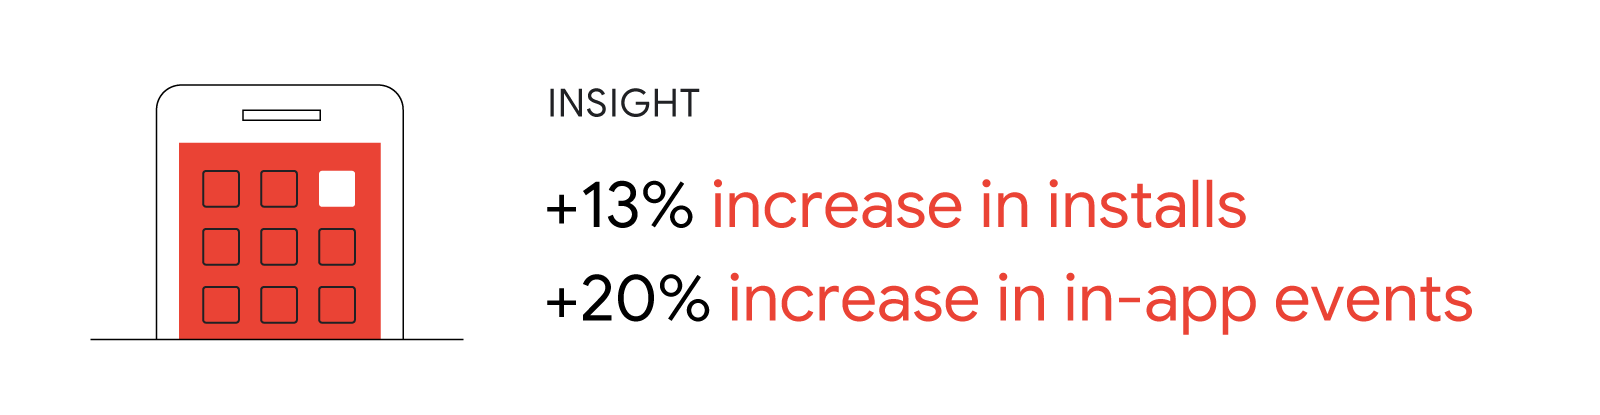 Insight: +13% increase in installs, +20% increase in in-app events